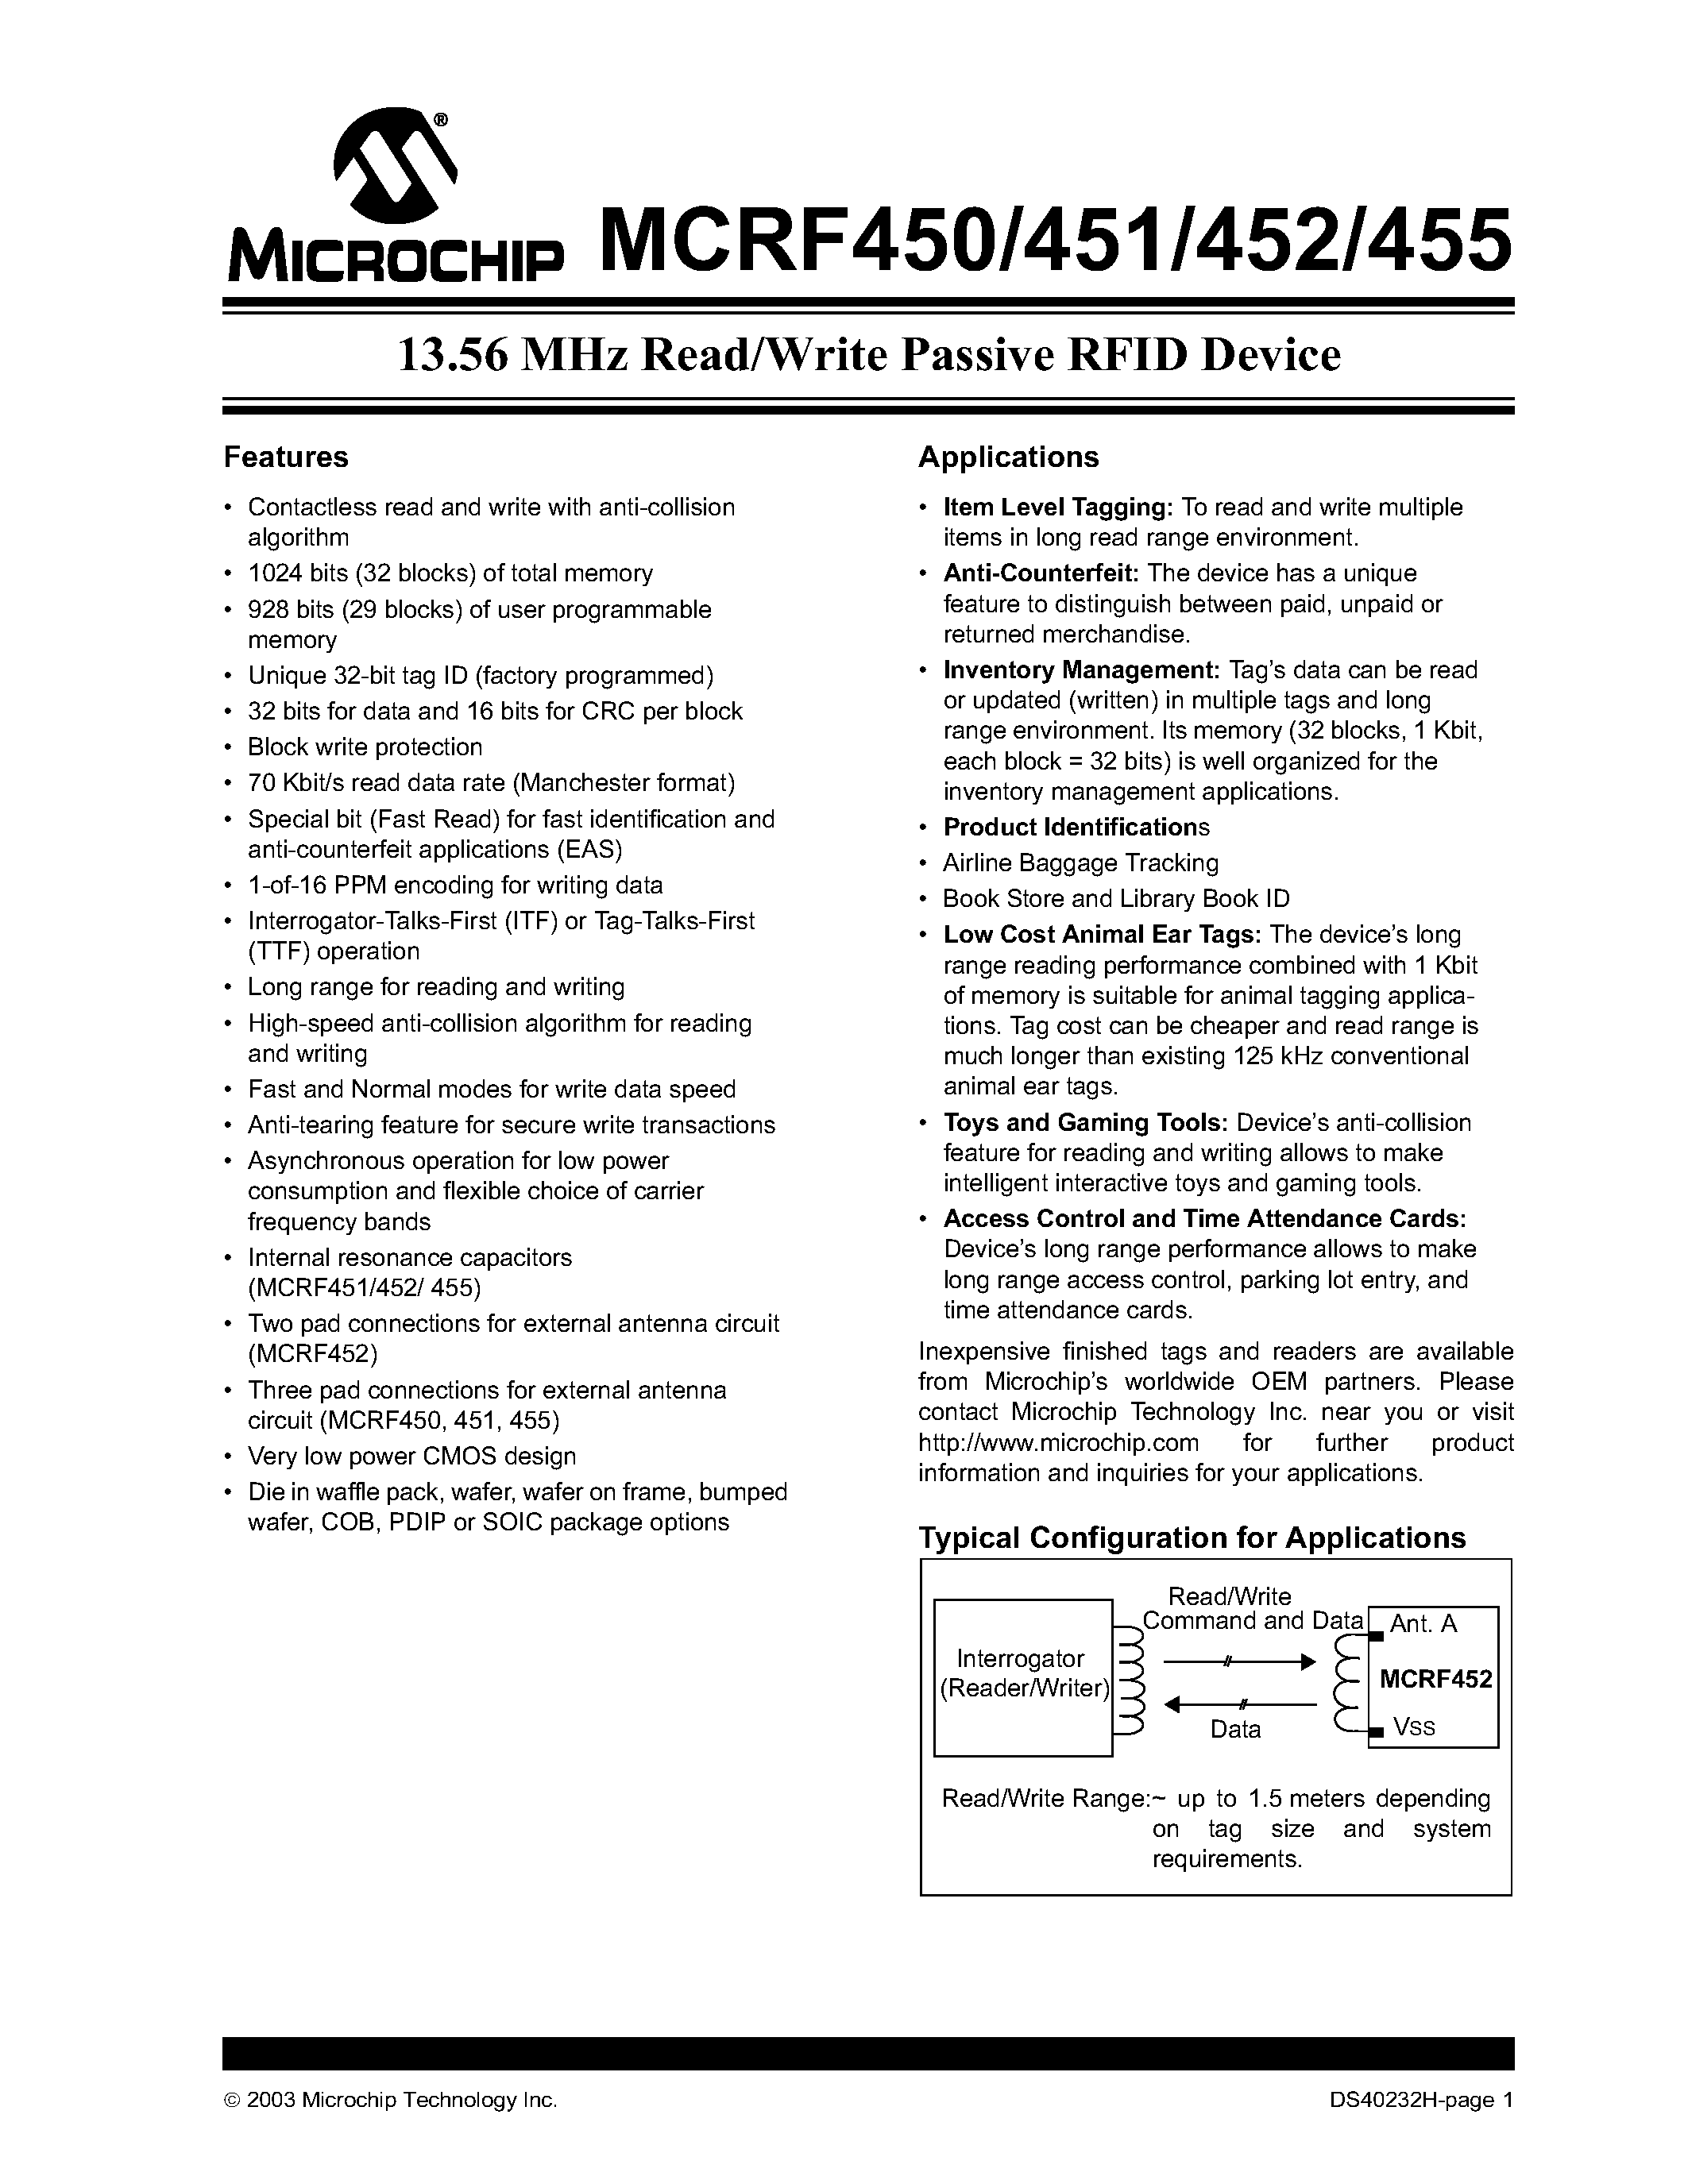 Datasheet MCRF455 - 13.56 MHz Read/Write Passive RFID Device page 1